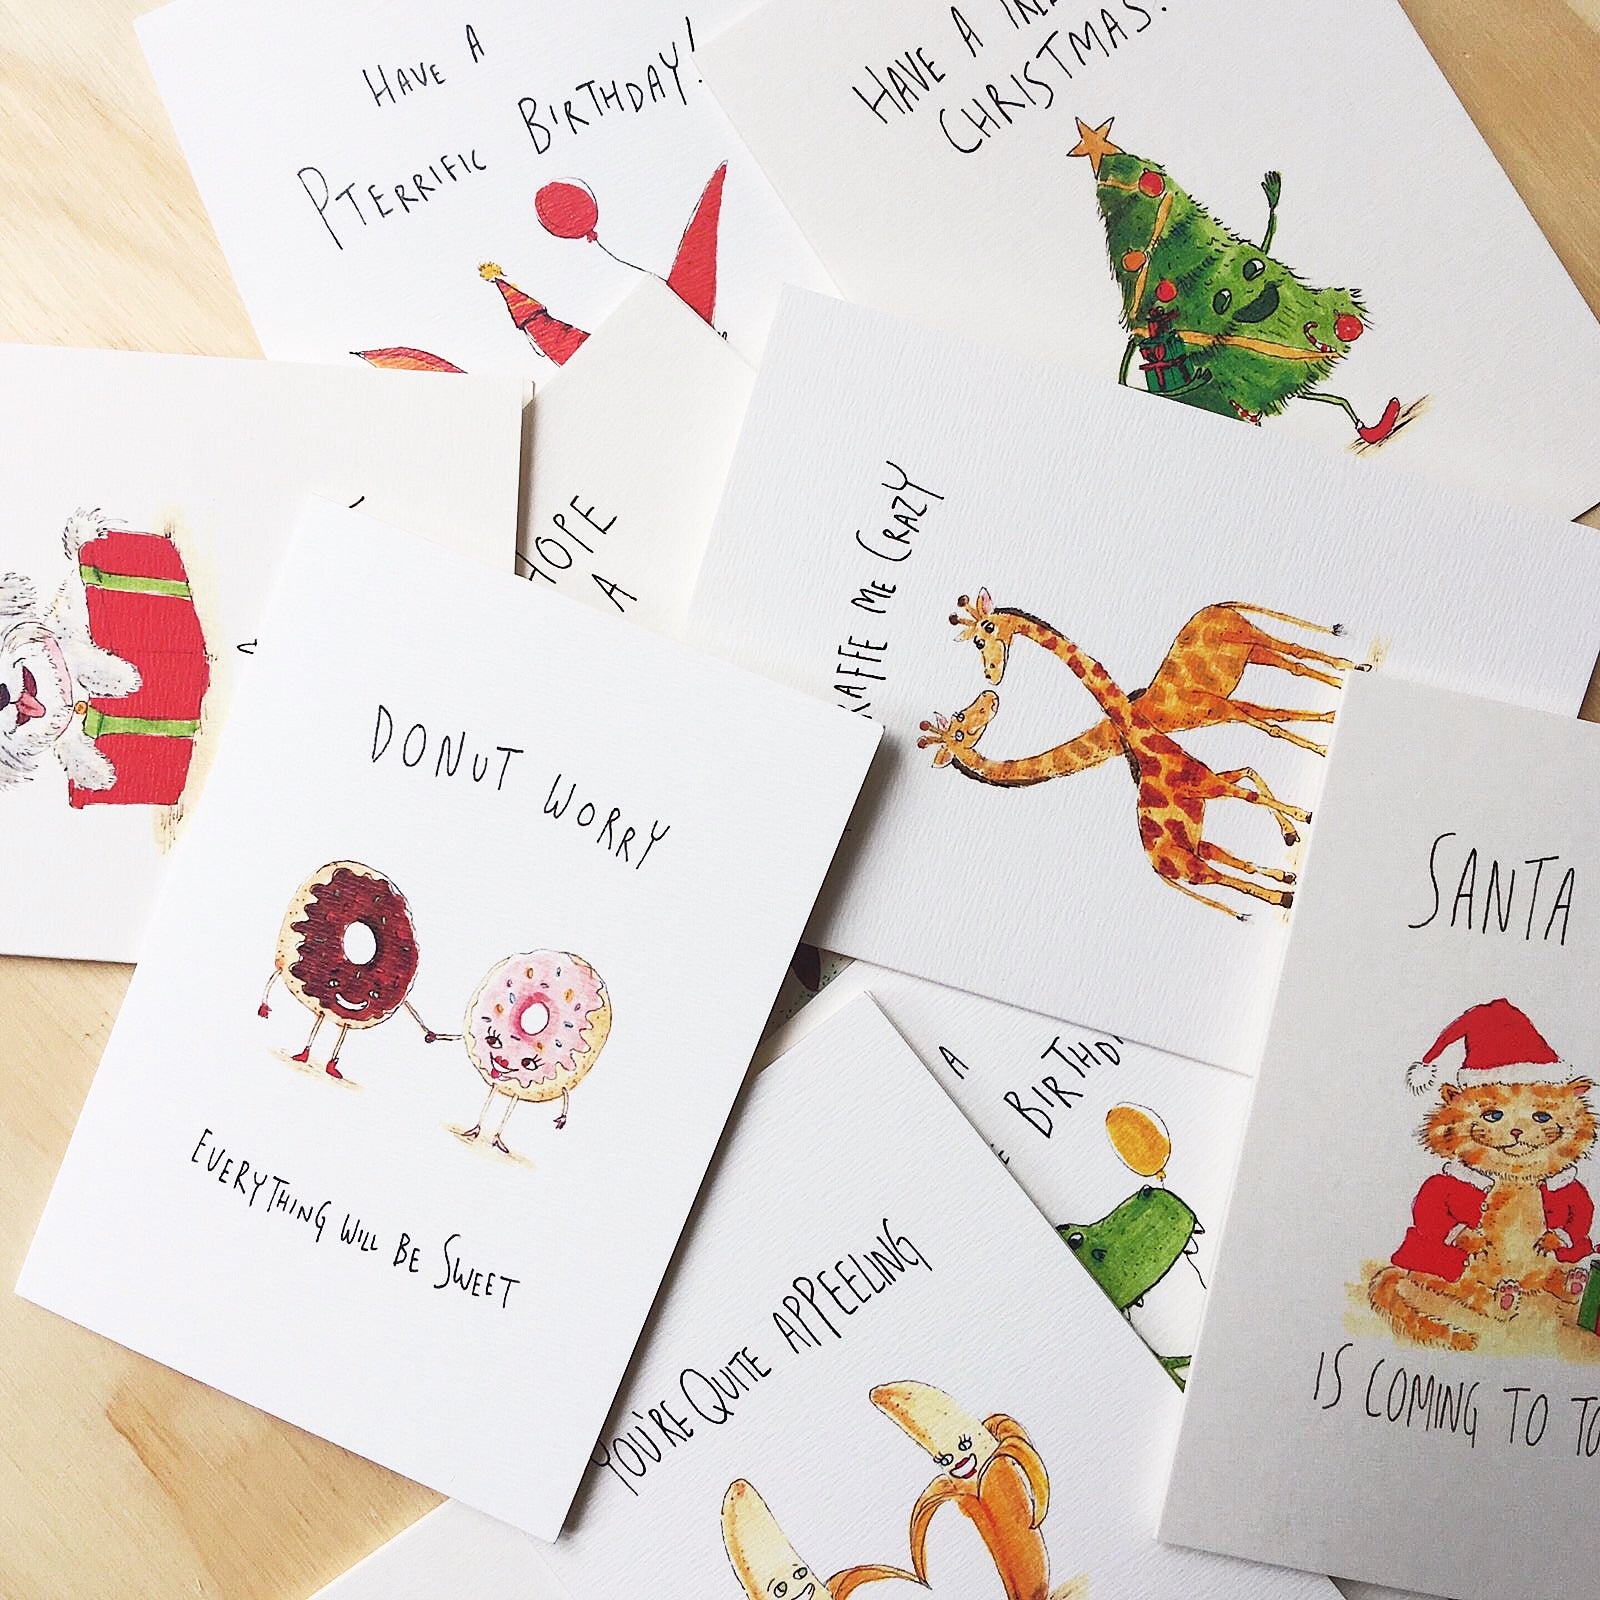 Best tips for starting a business selling greeting cards in 2023